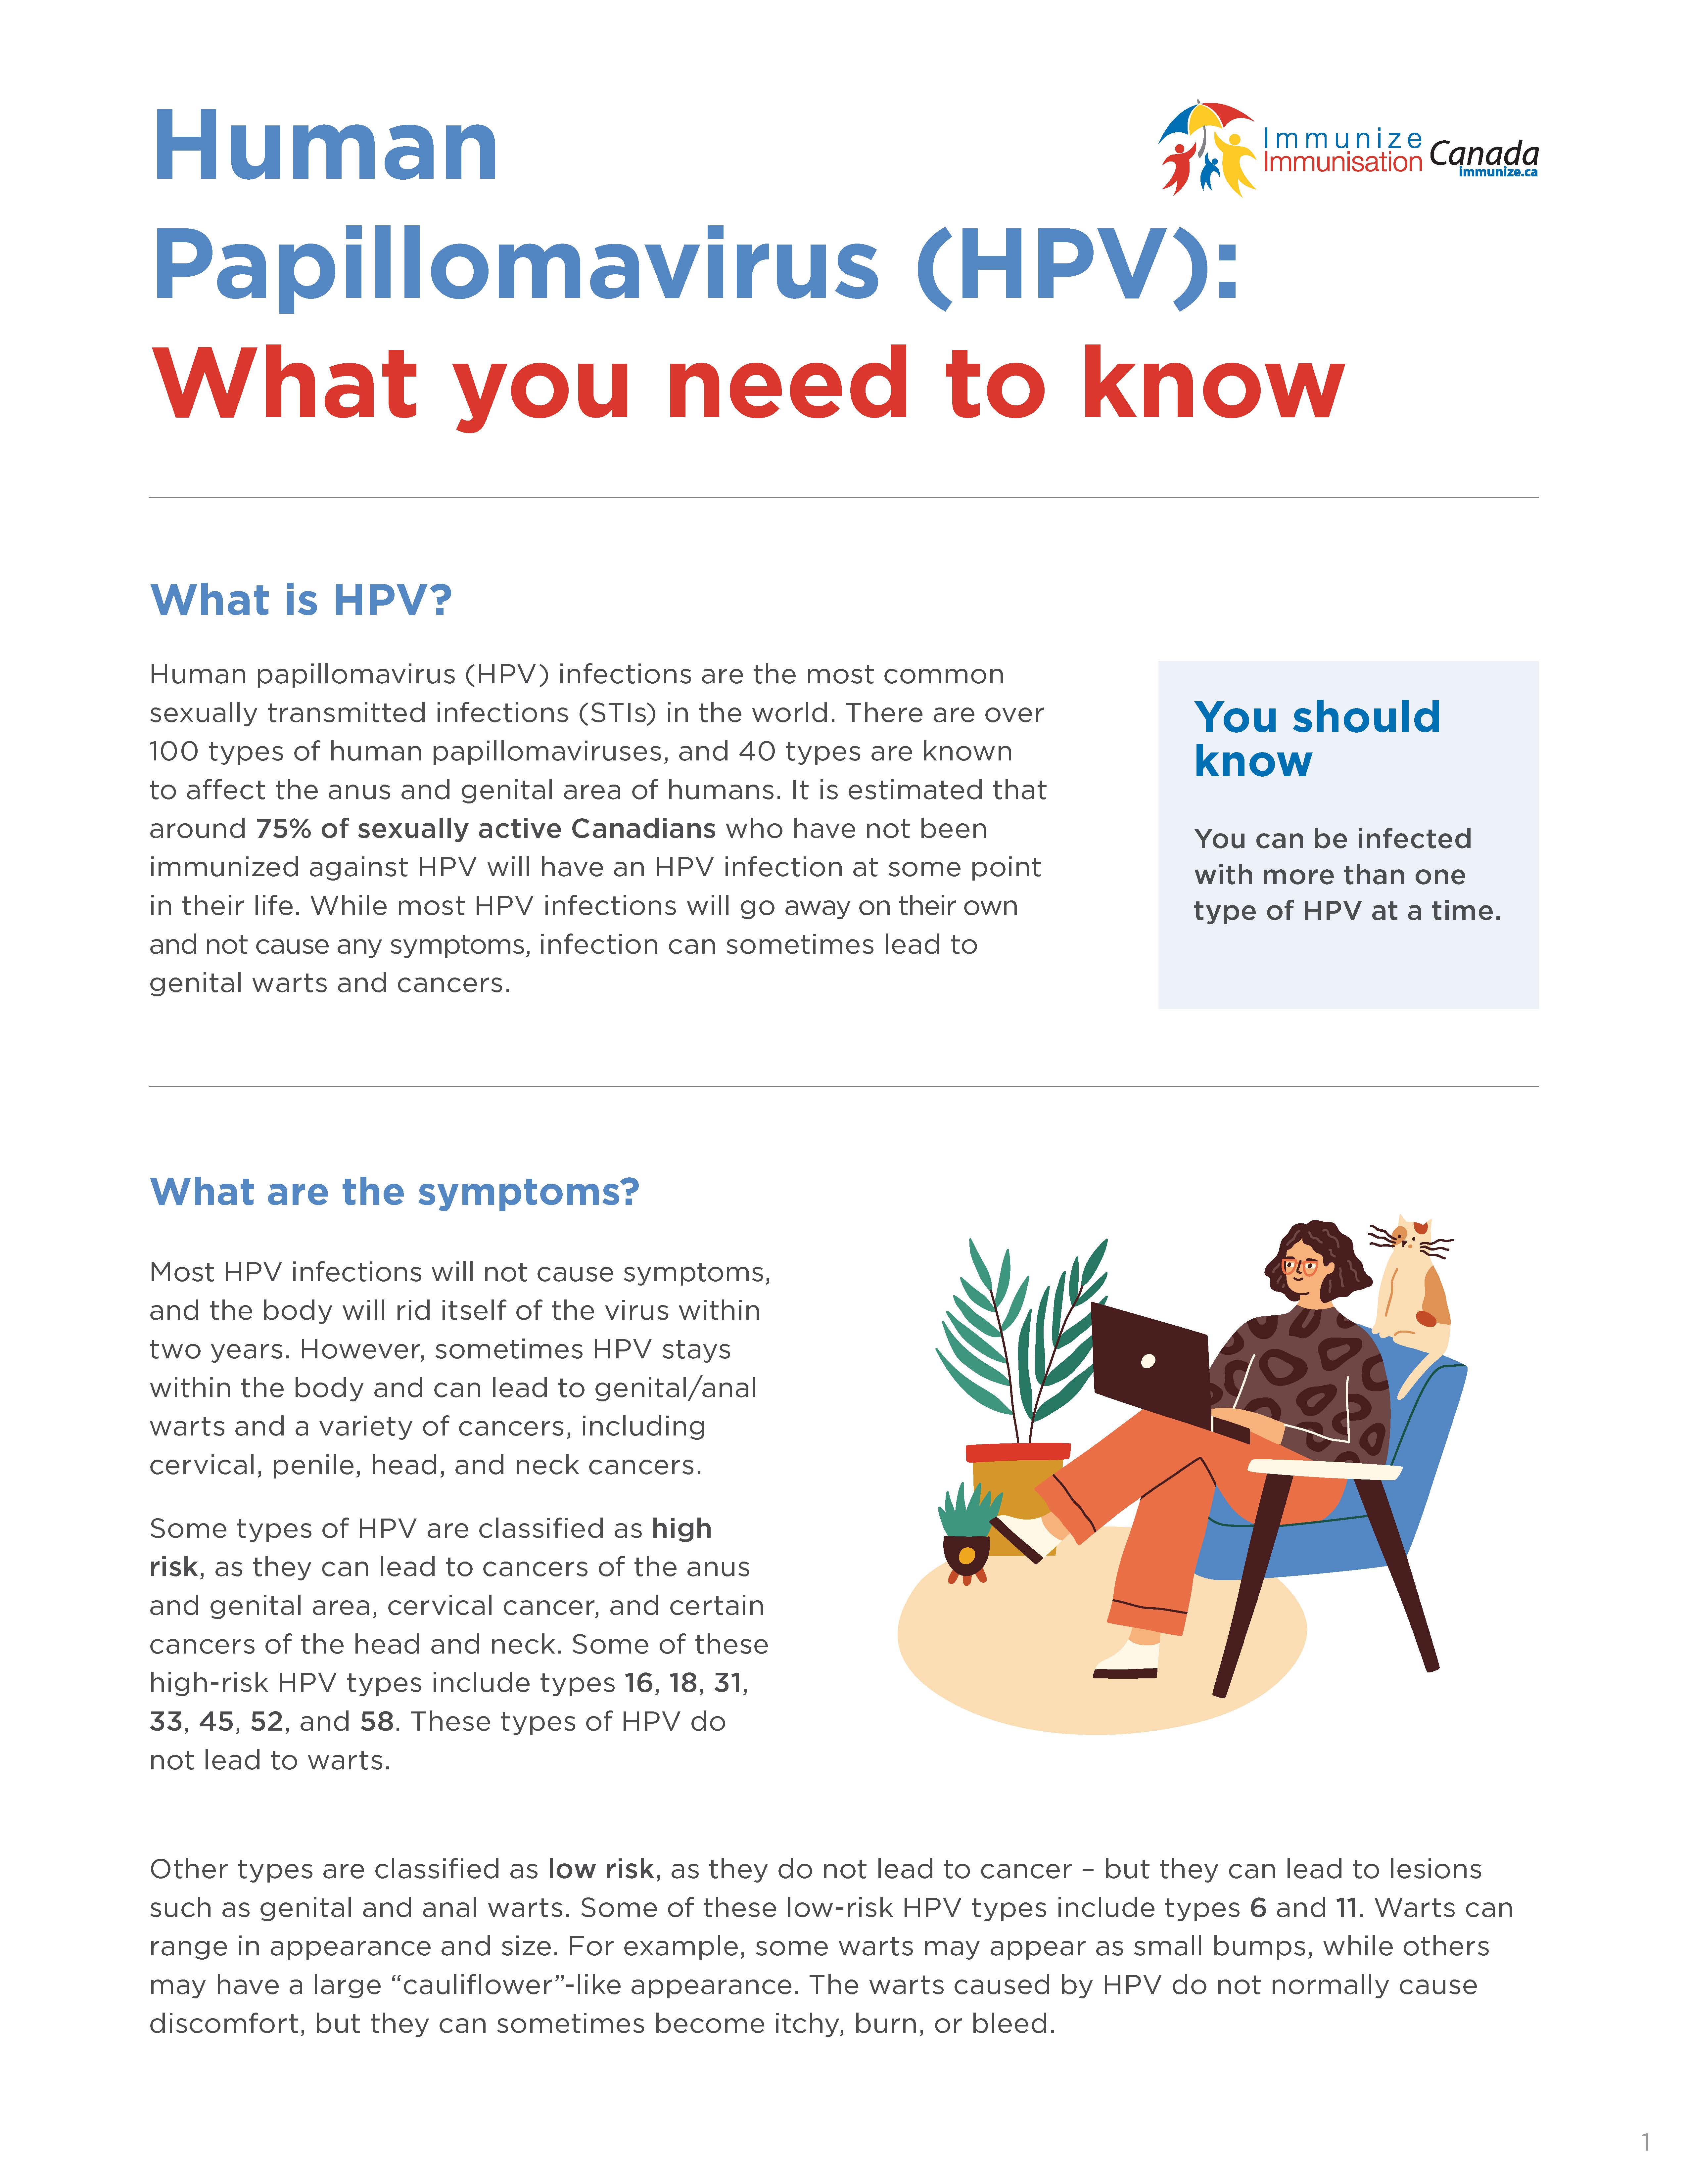 Human Papillomavirus (HPV): What you need to know